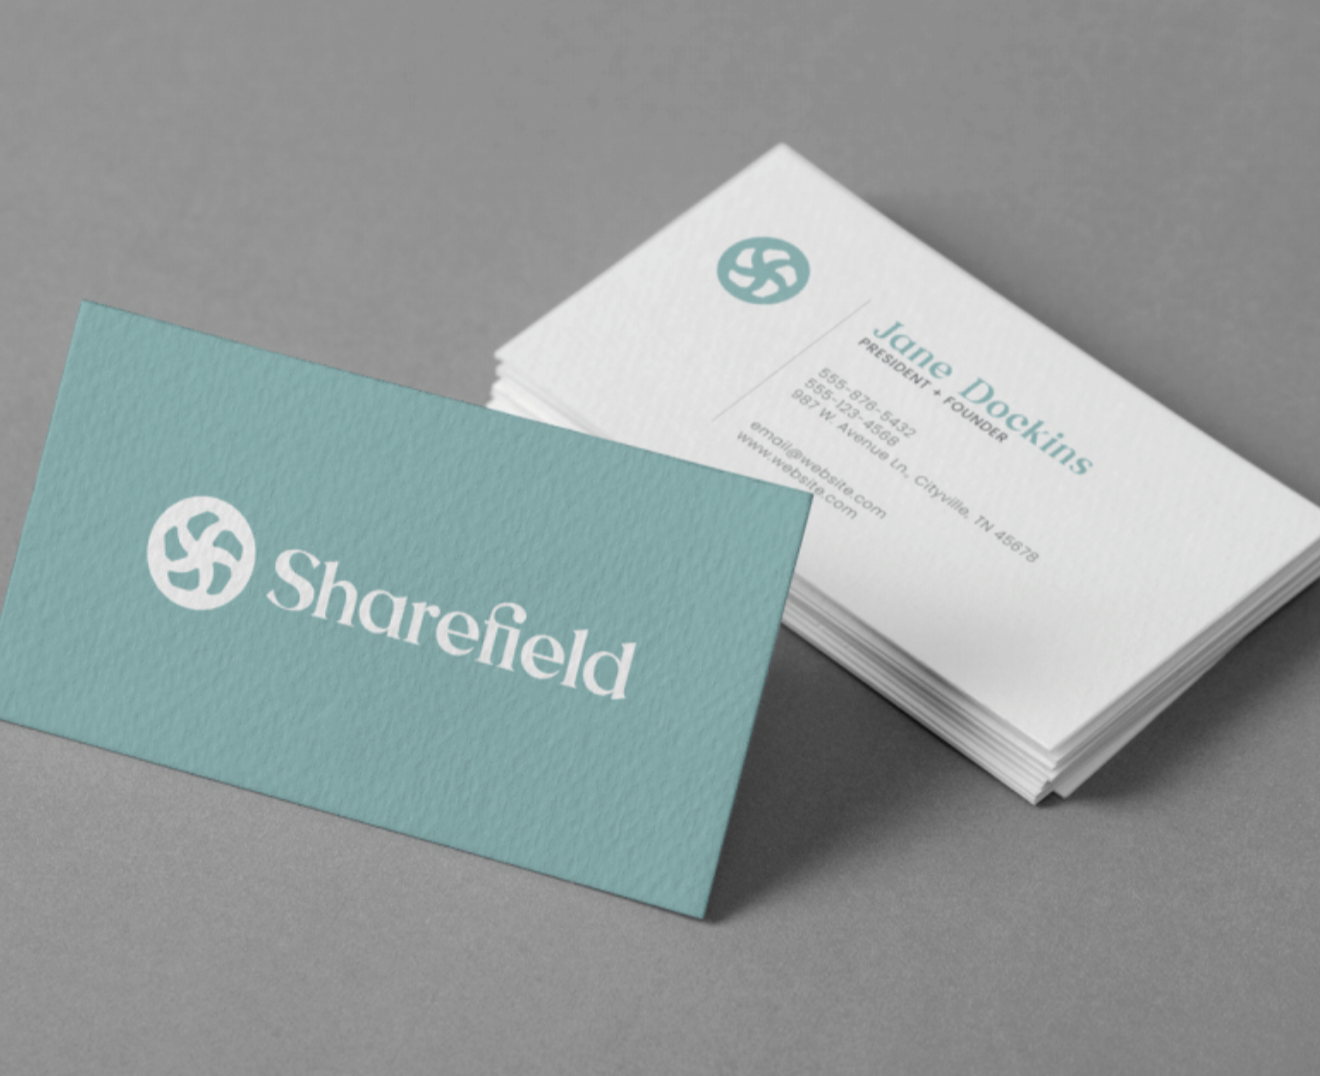 Sharefield business cards